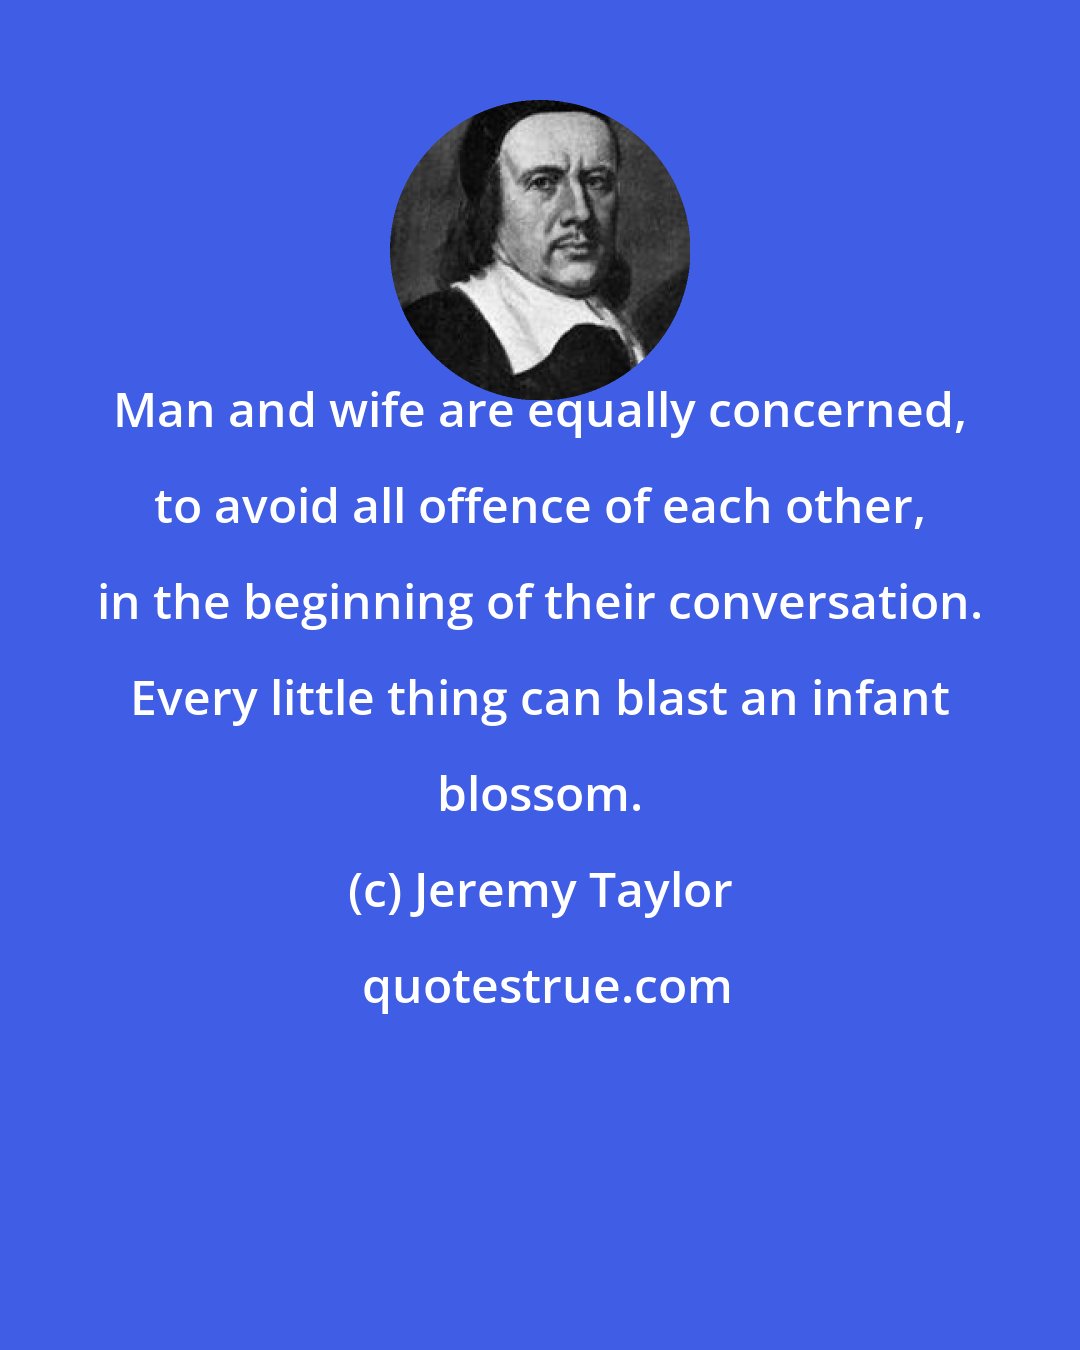 Jeremy Taylor: Man and wife are equally concerned, to avoid all offence of each other, in the beginning of their conversation. Every little thing can blast an infant blossom.